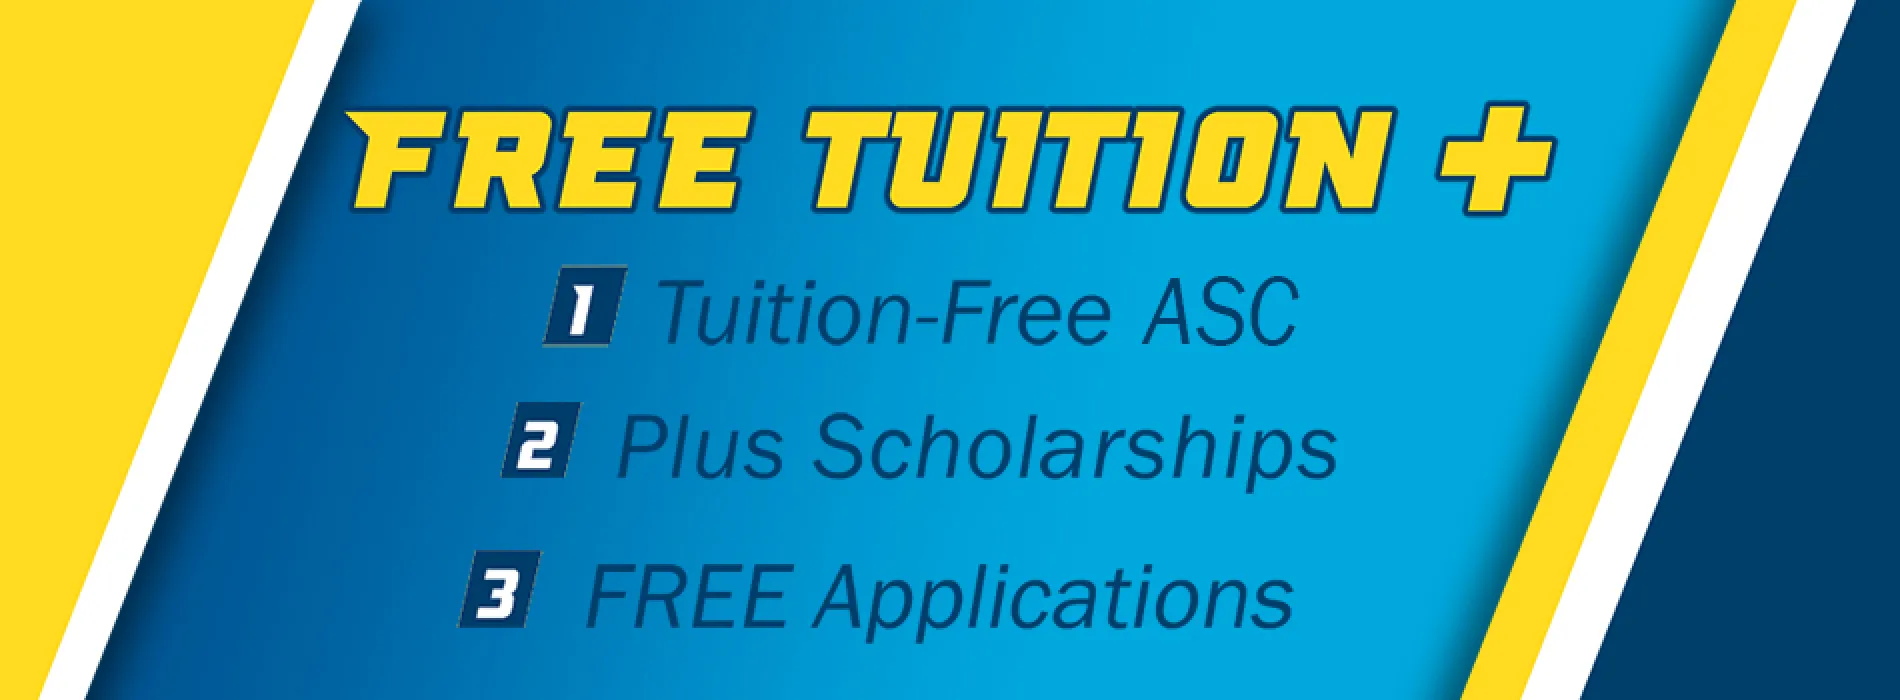 Free tuition + 1) tuition-free ASC 2) plus scholarships 3) free applications